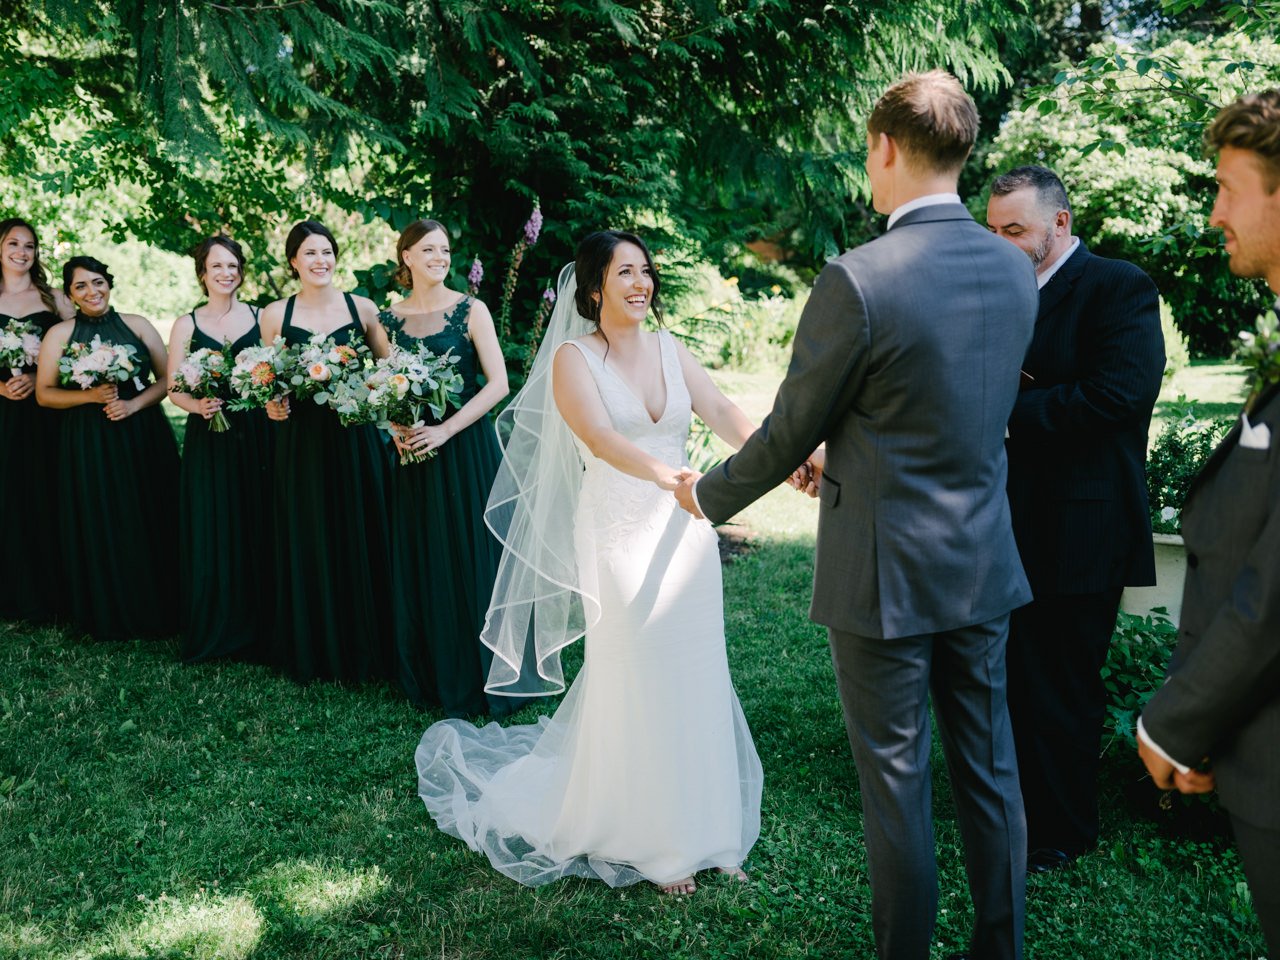  Bride laughs while holding grooms hand at wedding ceremony 